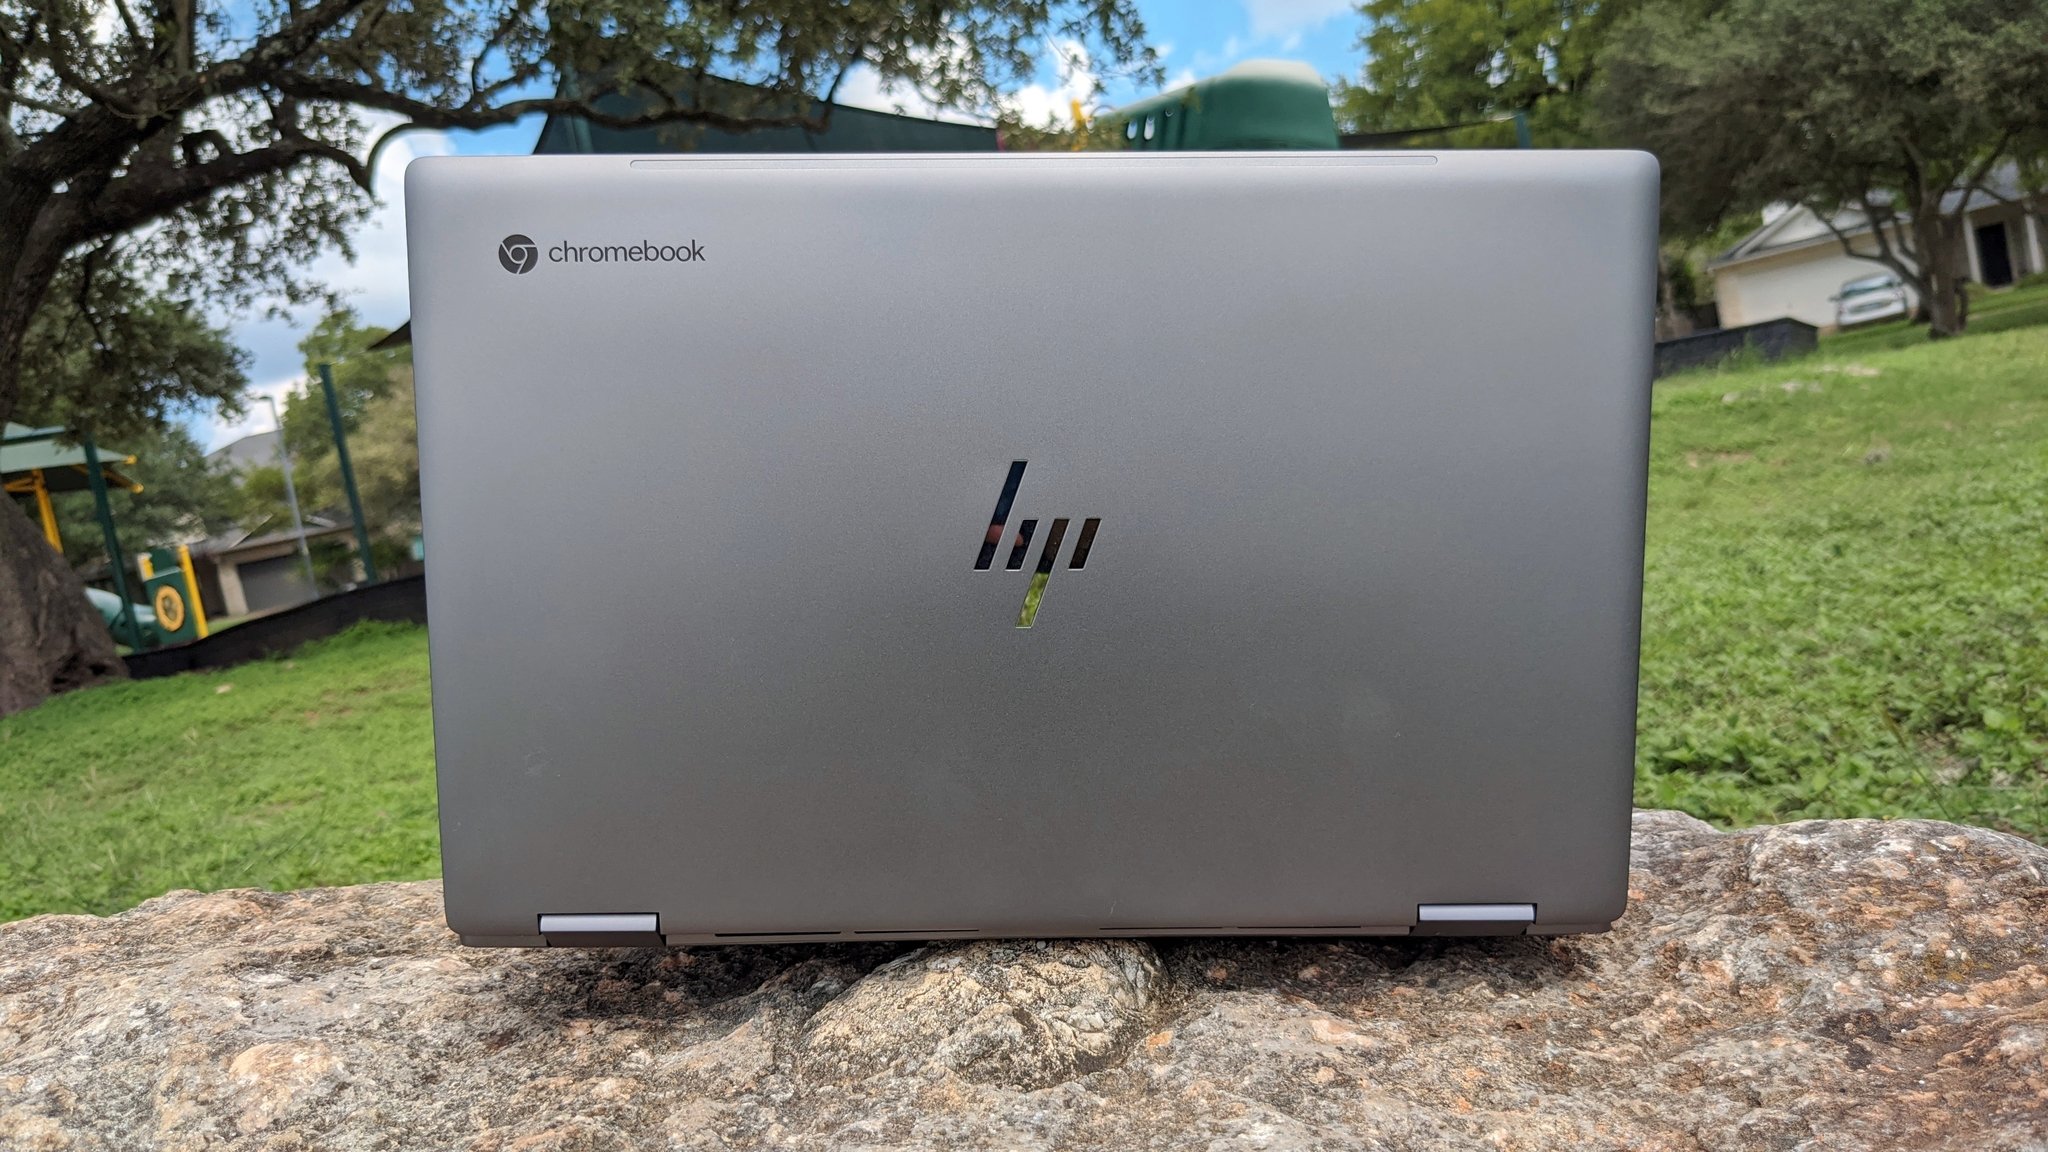 HP Chromebook Plus x360 14c Review: Great When The Price Is Right